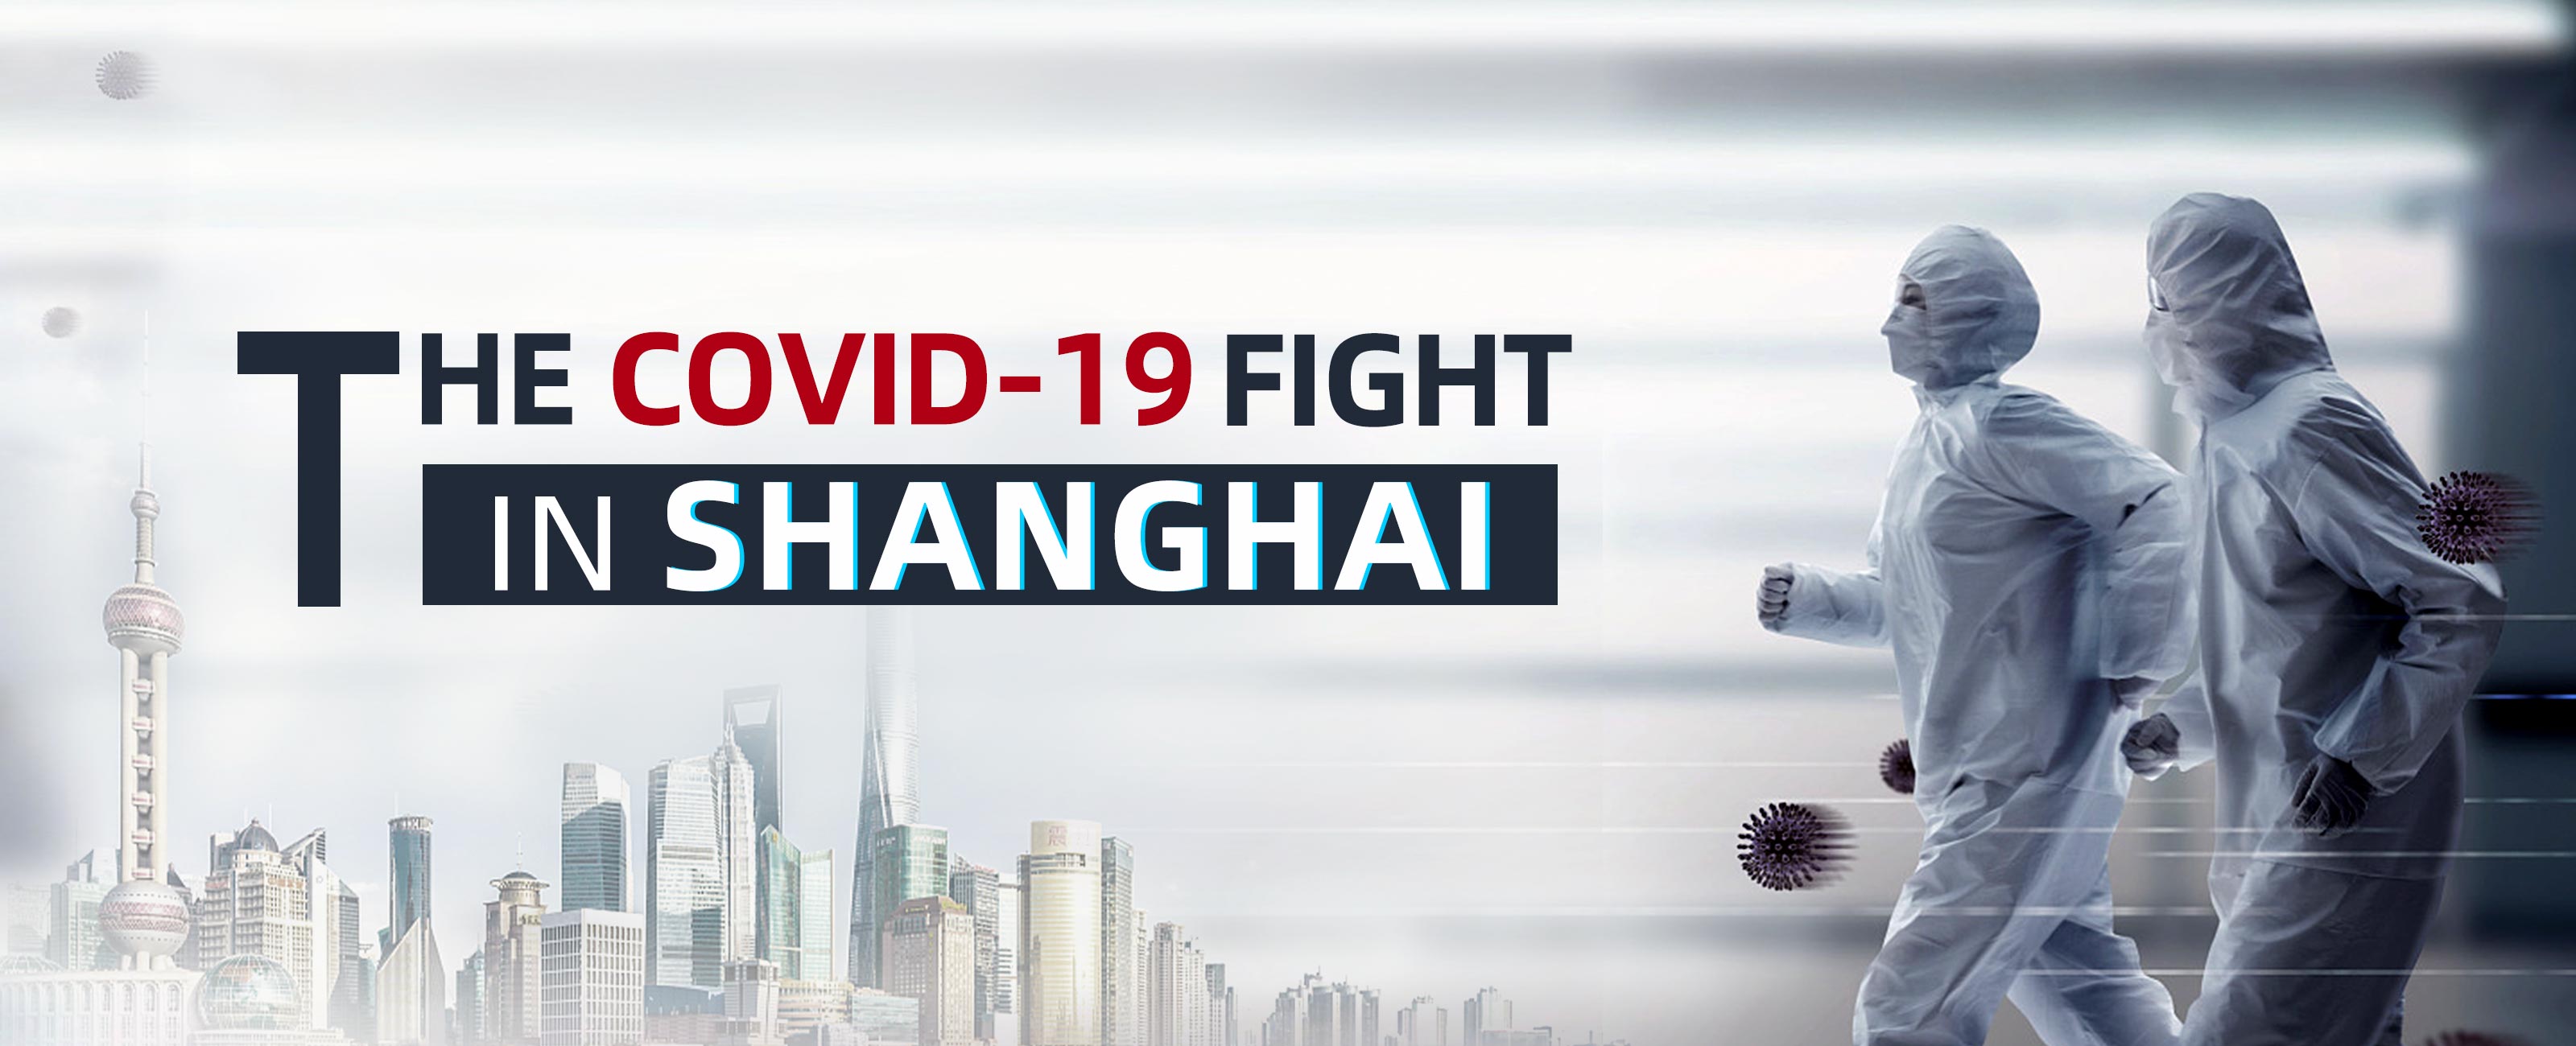 THE COVID-19 FIGHT IN SHANGHAI